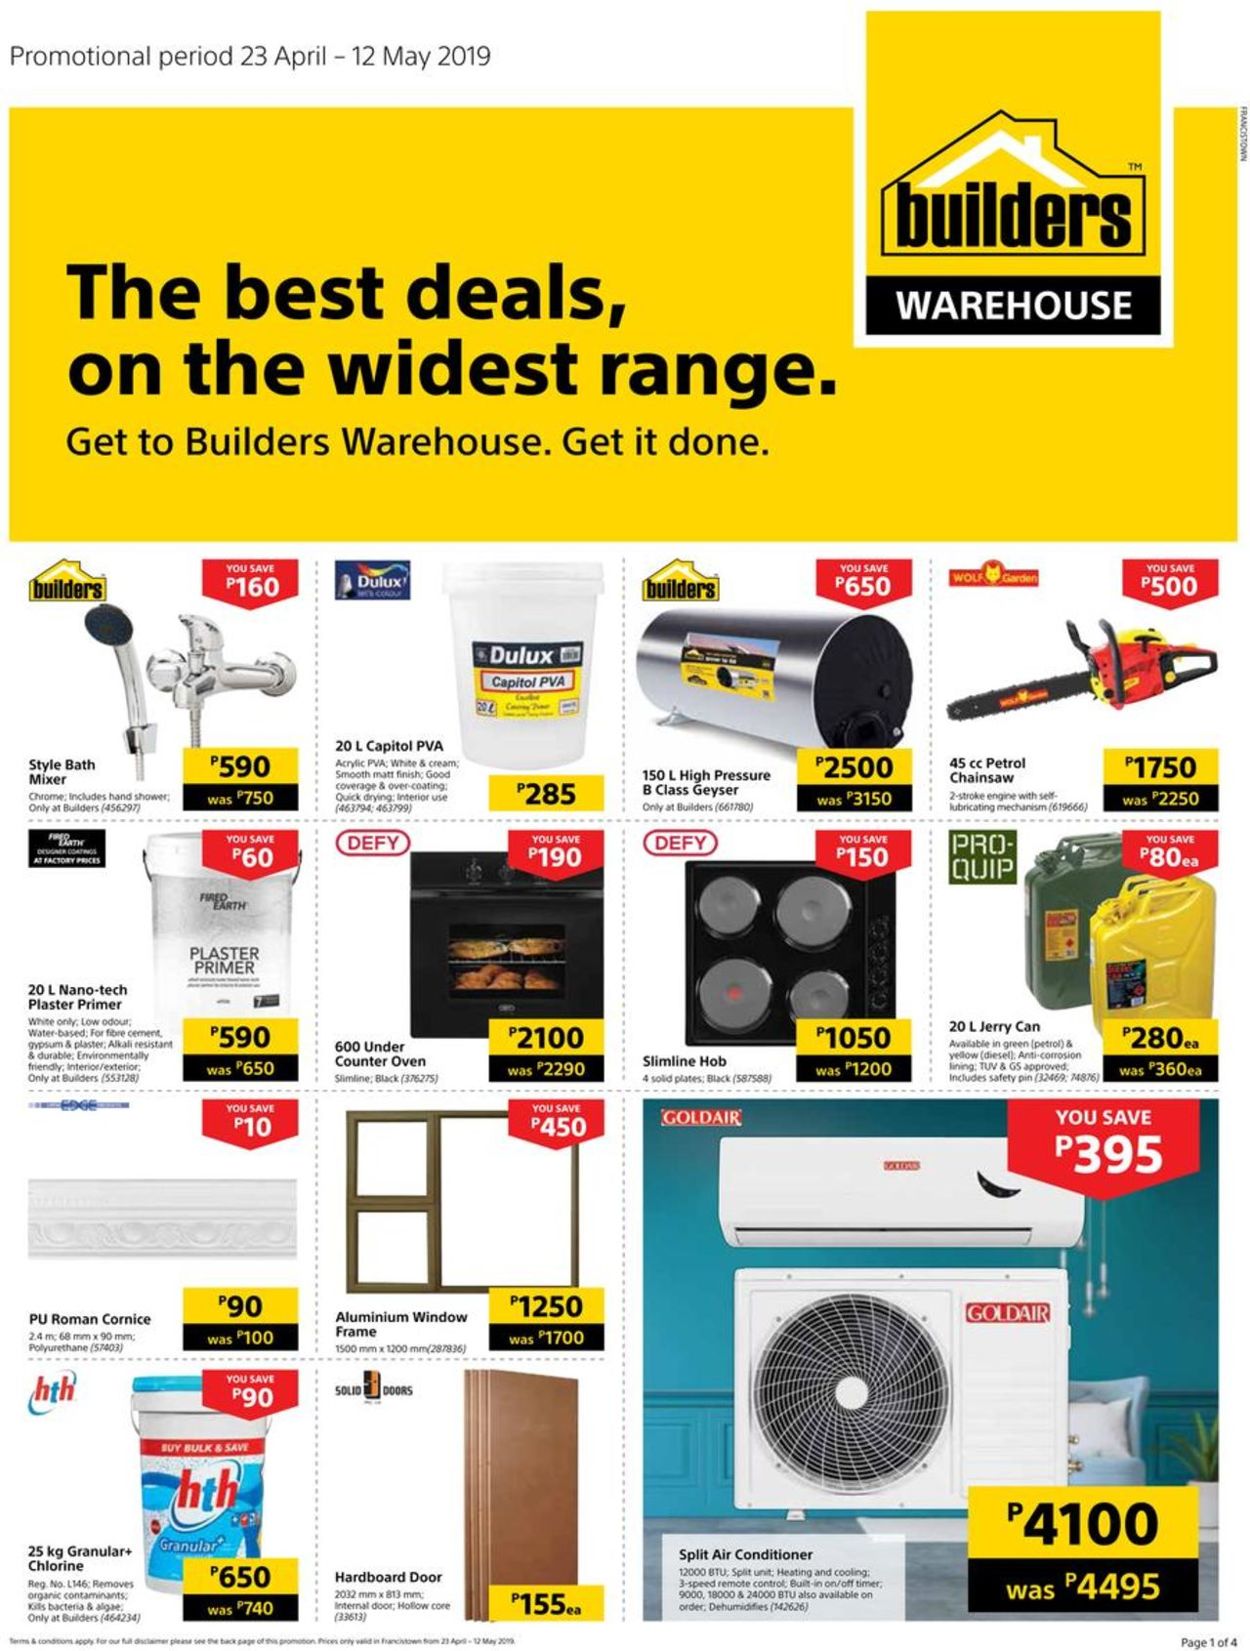 Builders Warehouse - Francistown Catalogue - 2019/04/23-2019/05/12